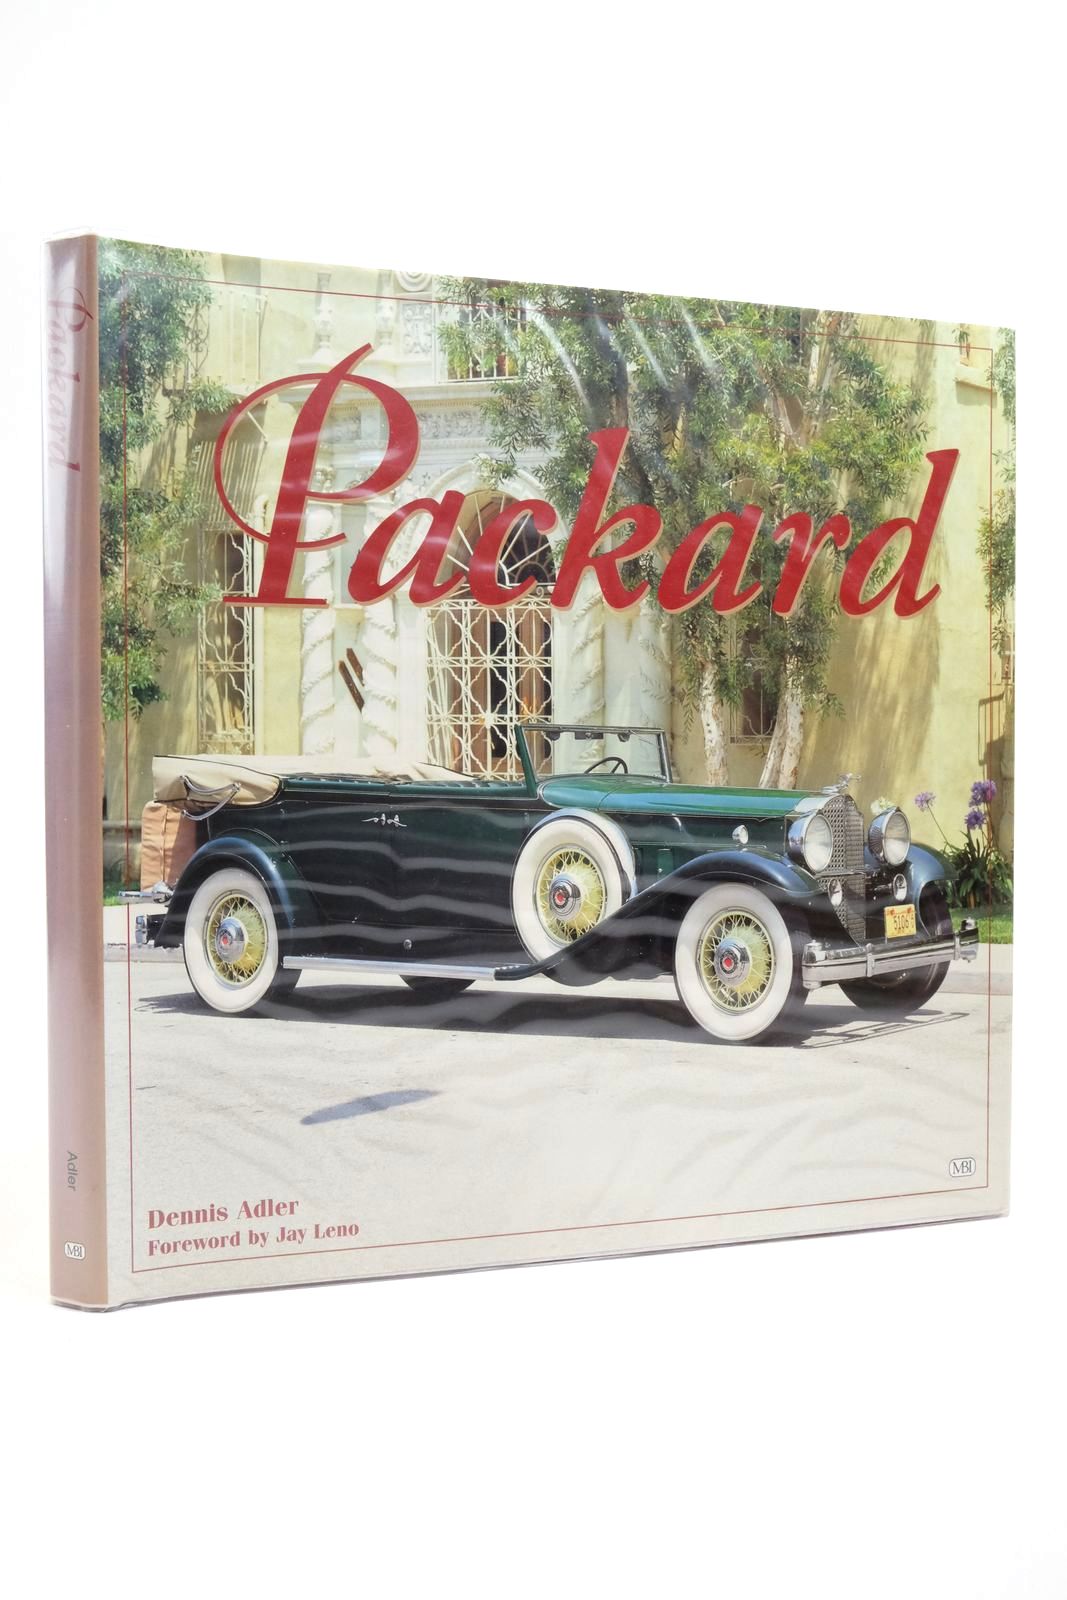 Photo of PACKARD- Stock Number: 2138639